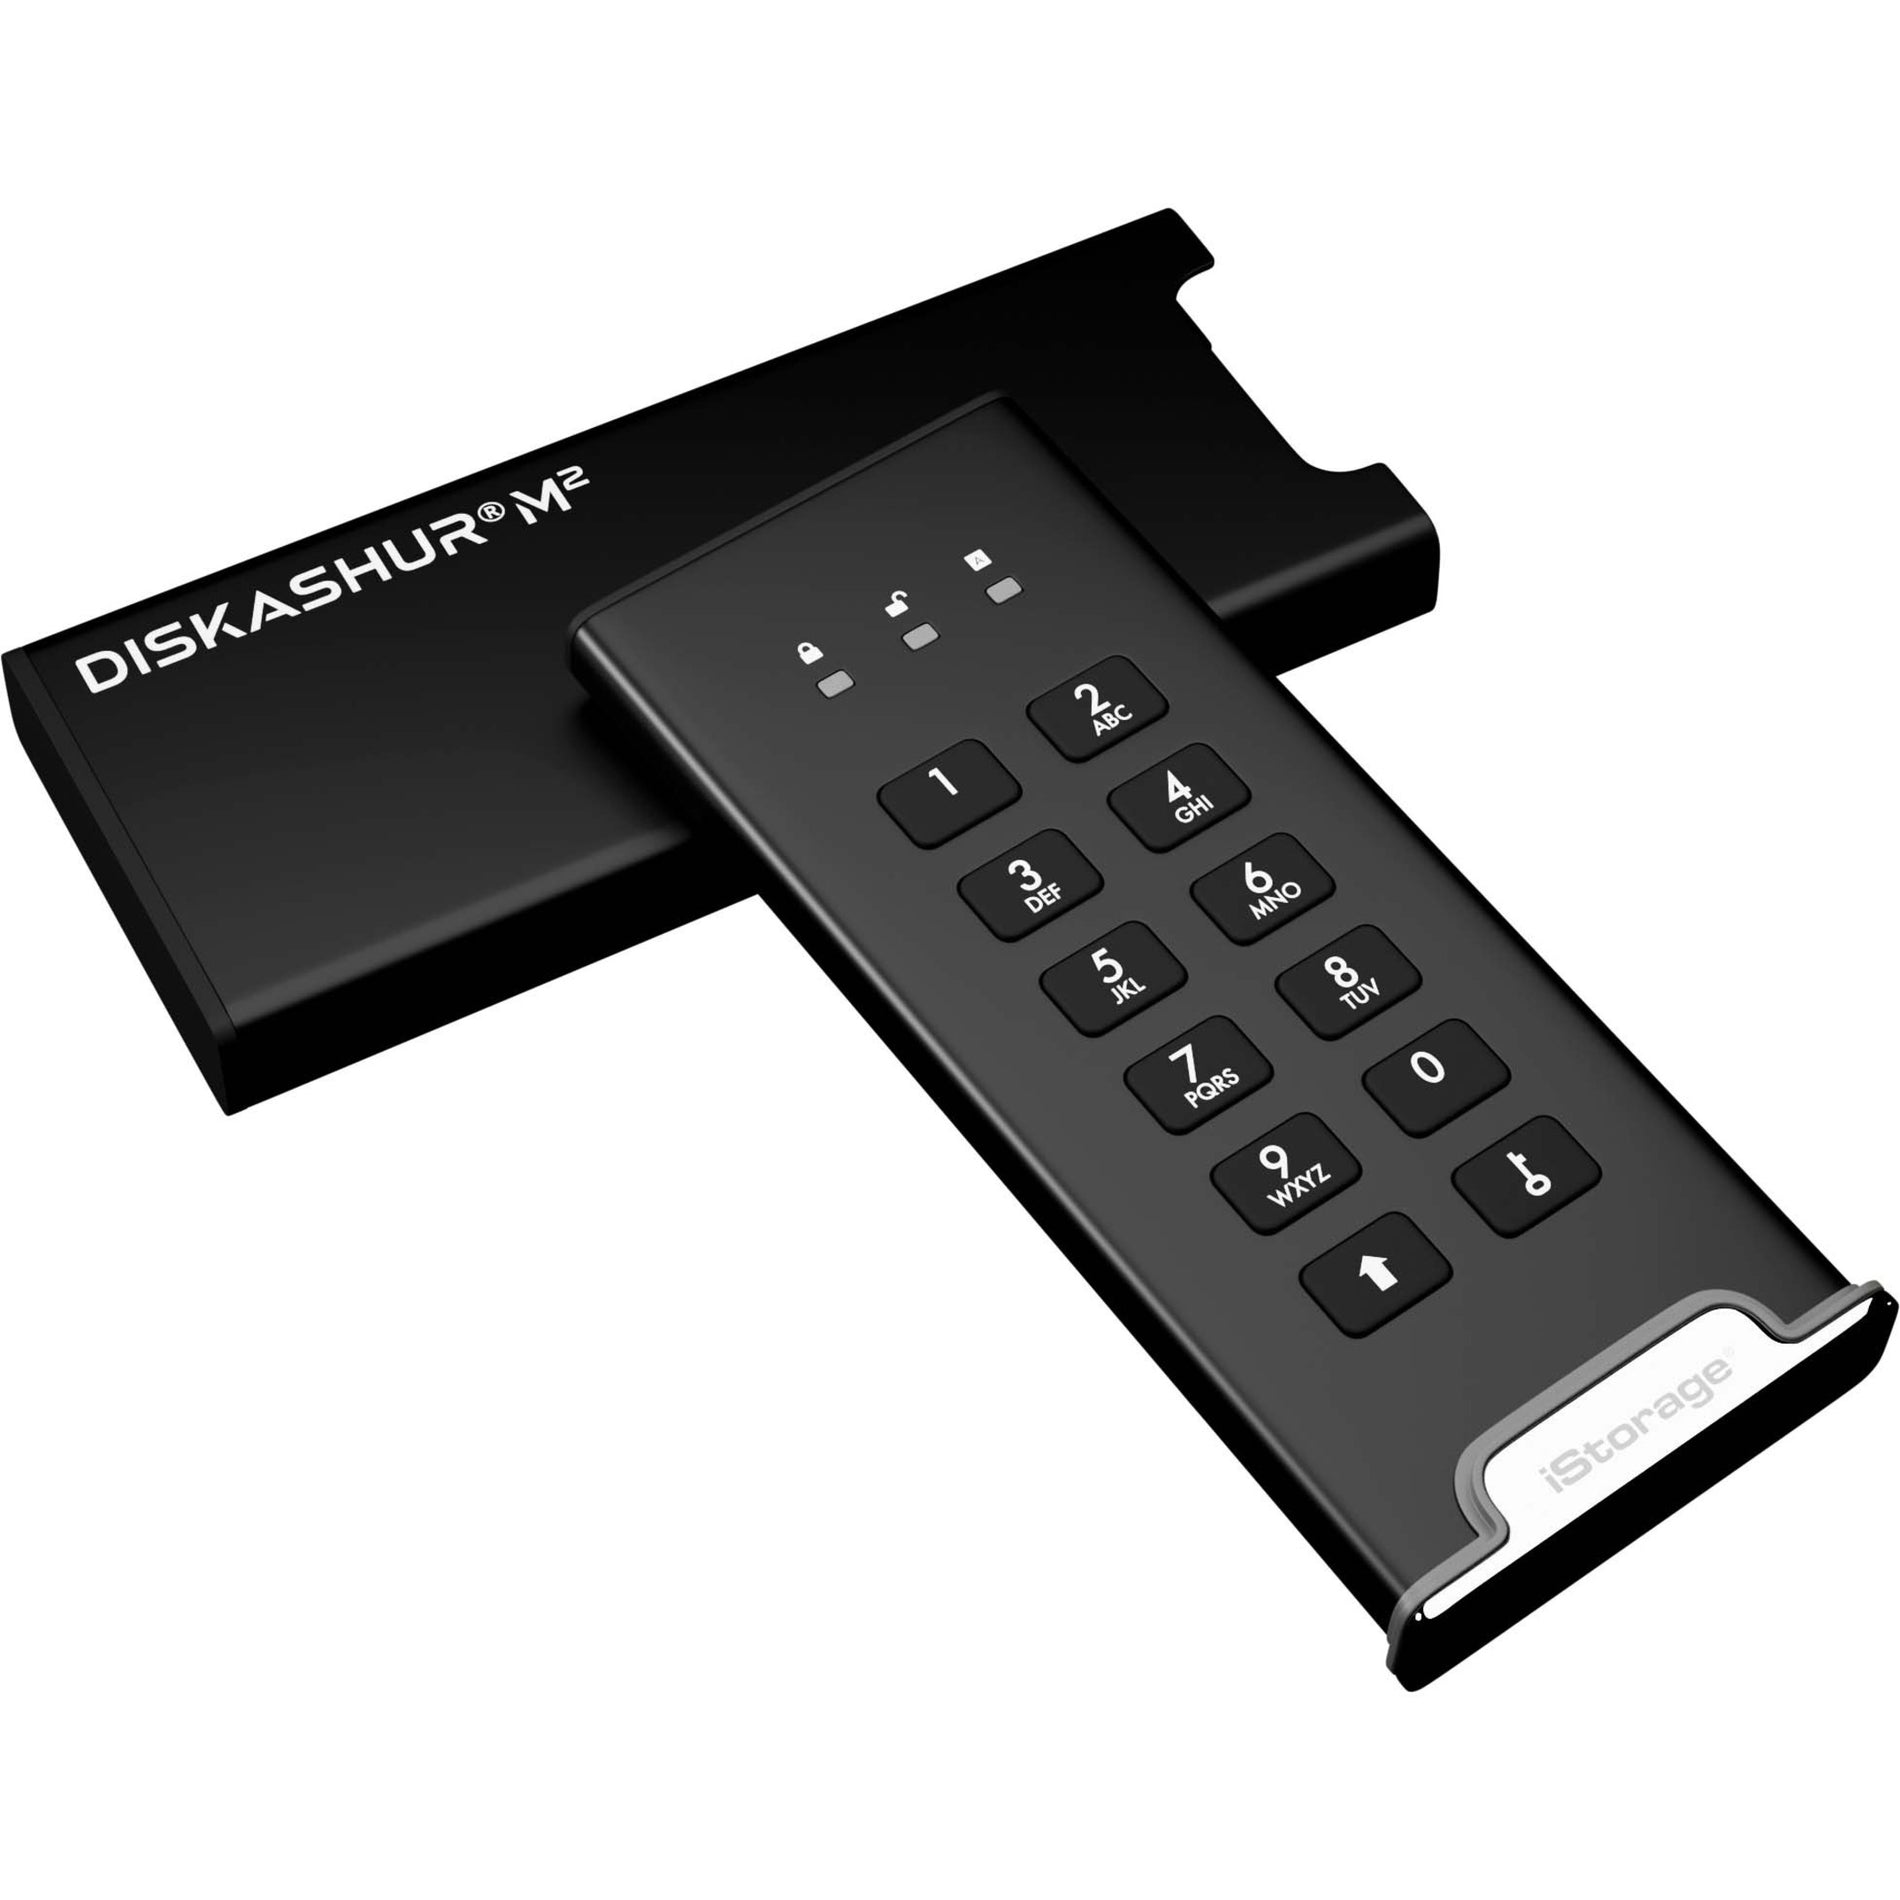 iStorage IS-DAM2-256-240 diskAshur M2 Portable SSD, PIN Authenticated, Hardware Encrypted, USB 3.2, Ultra-fast, FIPS Compliant, Rugged & Portable